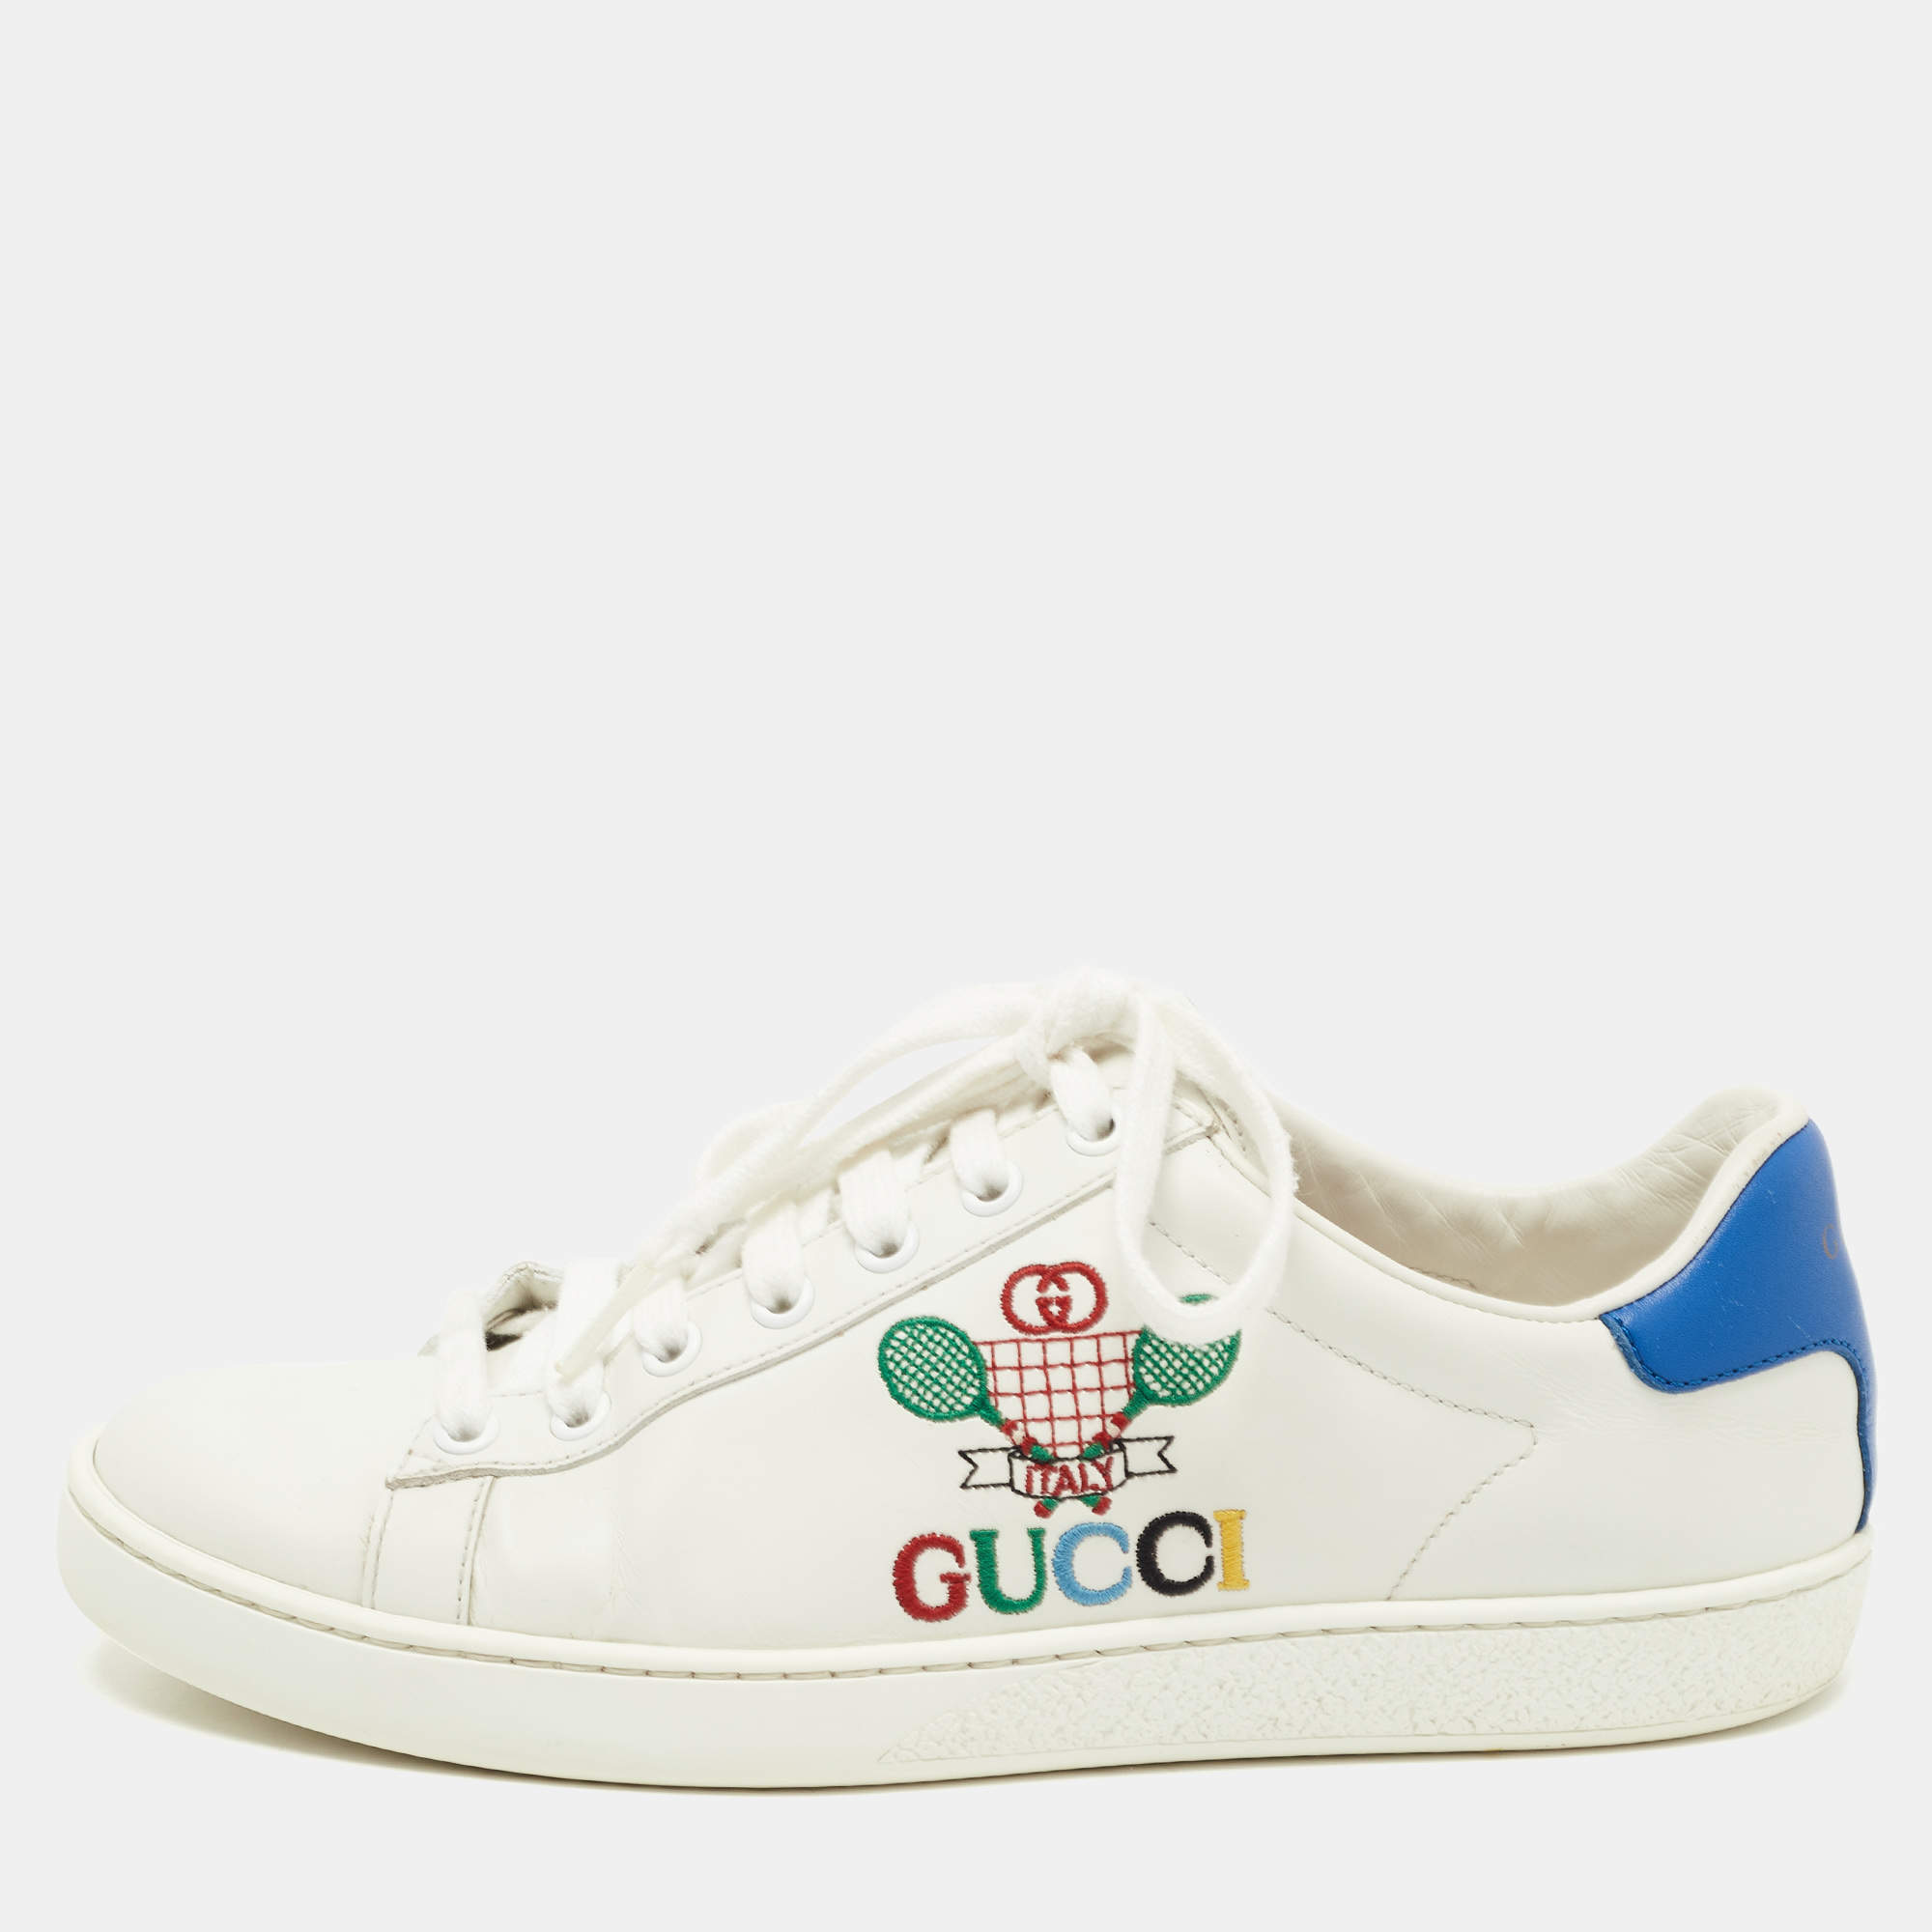 George Hanbury Muldyr Leeds Gucci White/Blue Leather Tennis Embroidered Low Top Sneakers Size 37.5 Gucci  | TLC